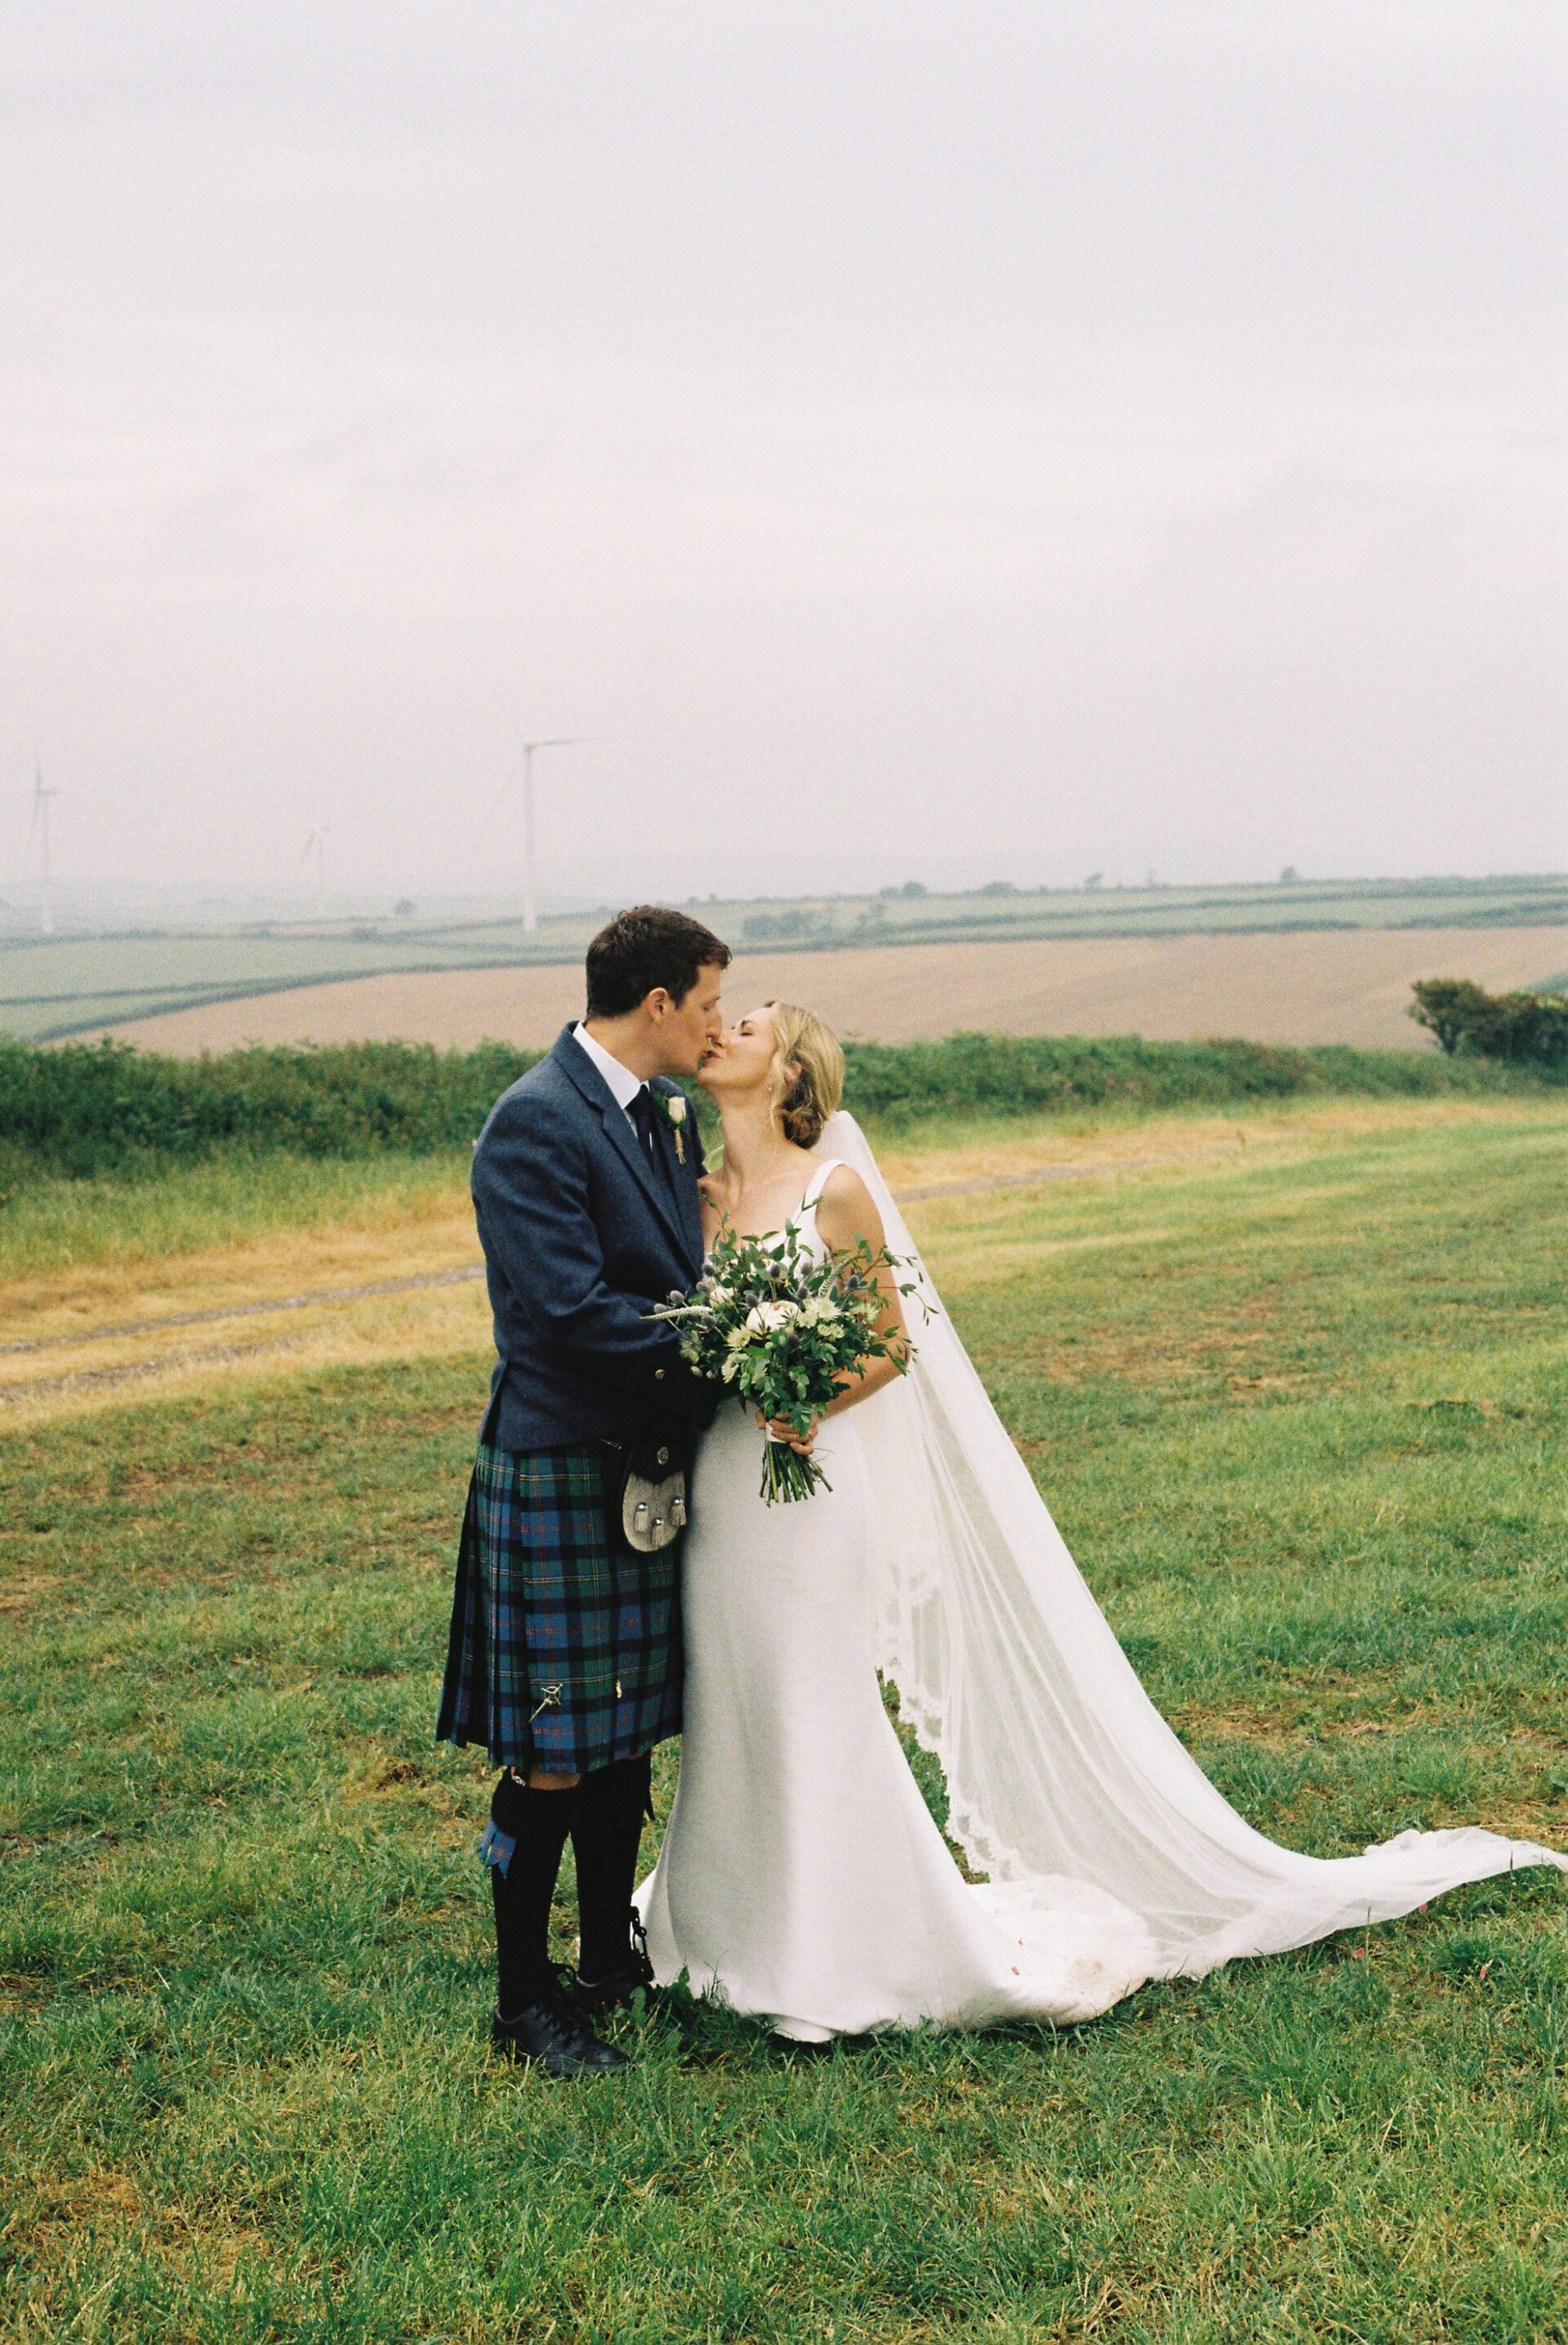 A 35mm film portrait of the bride and groom kissing